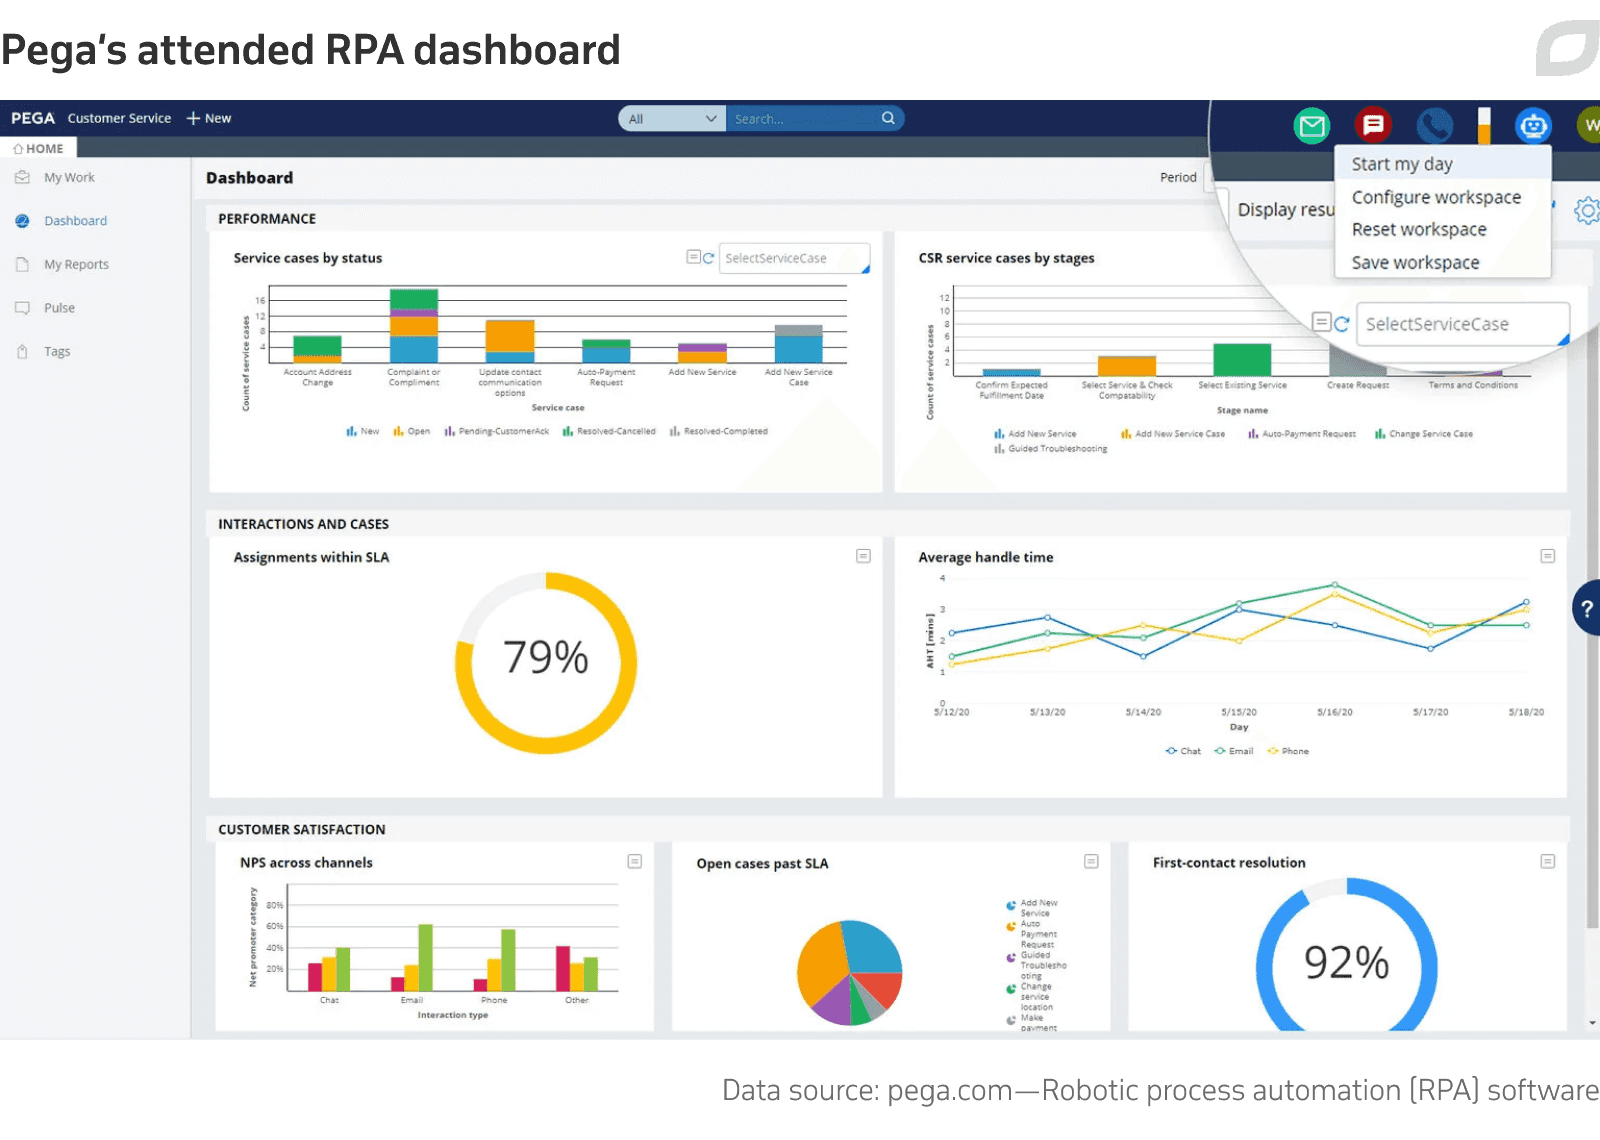 Pega’s attended RPA dashboard